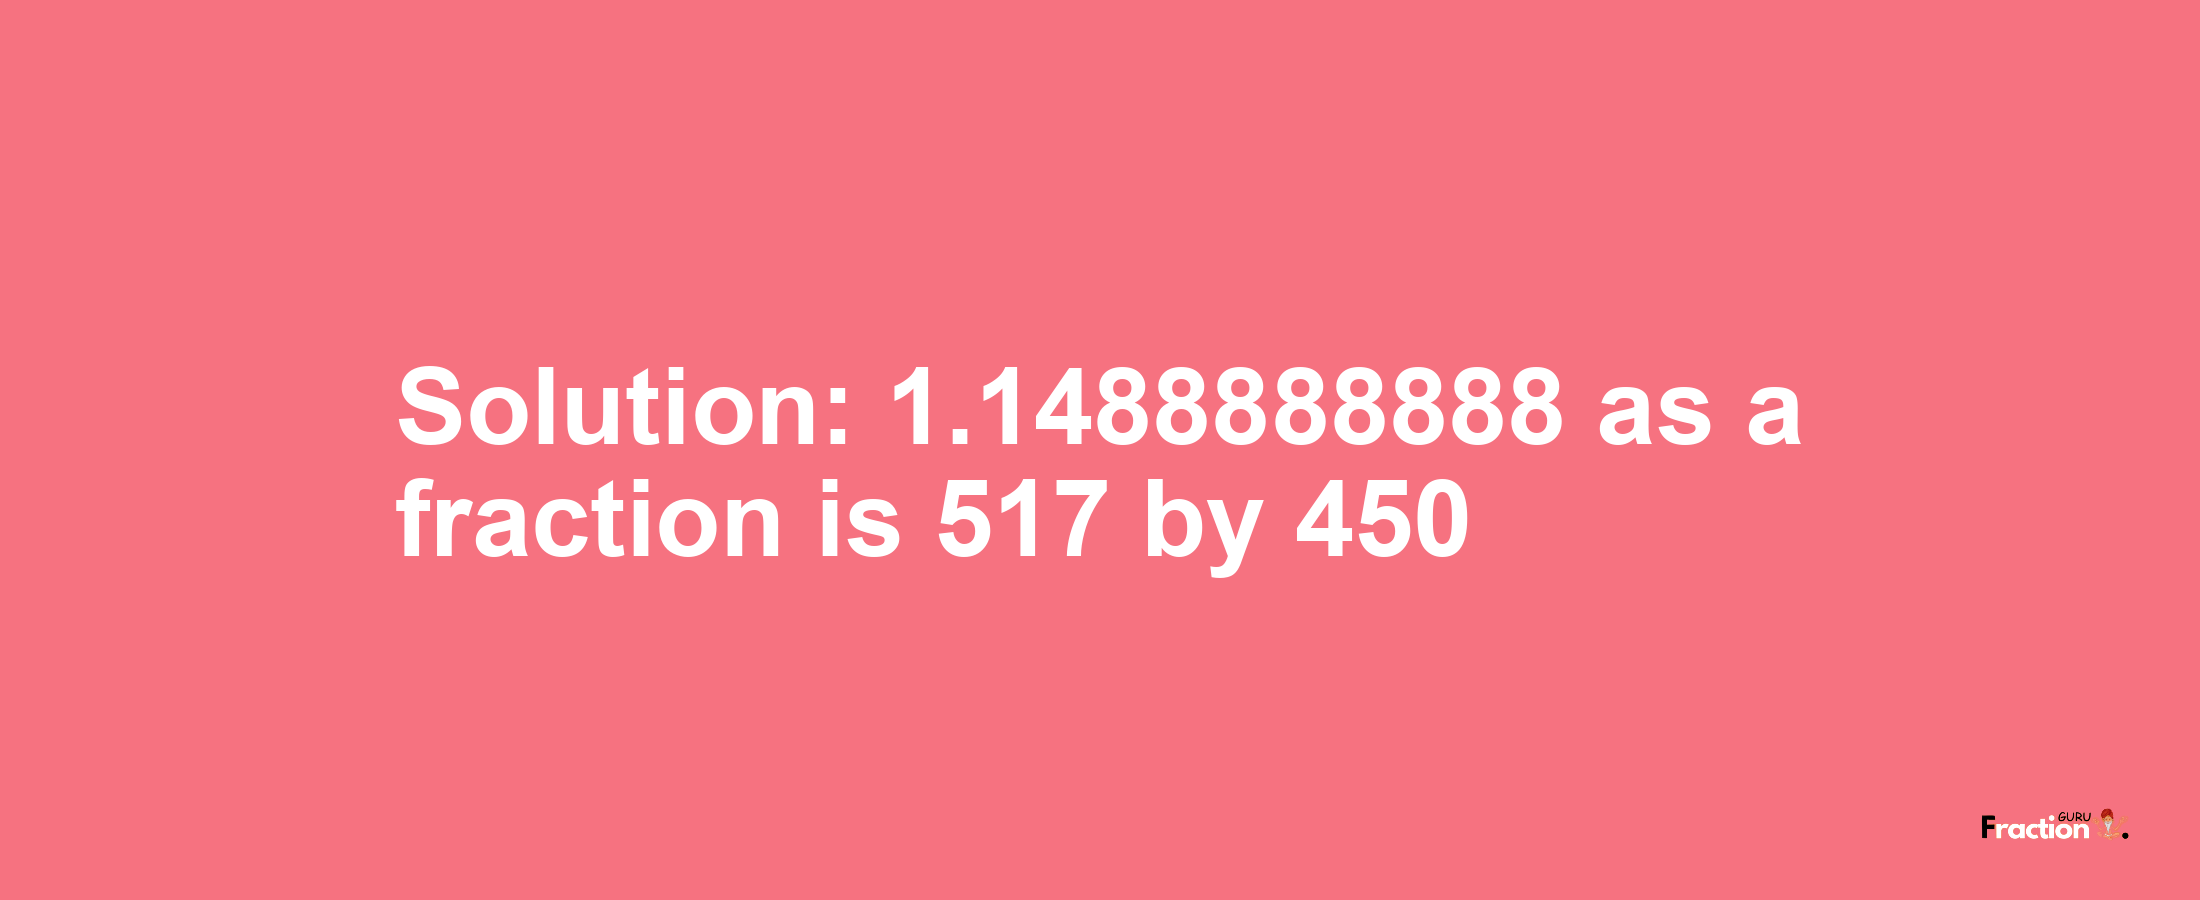 Solution:1.1488888888 as a fraction is 517/450